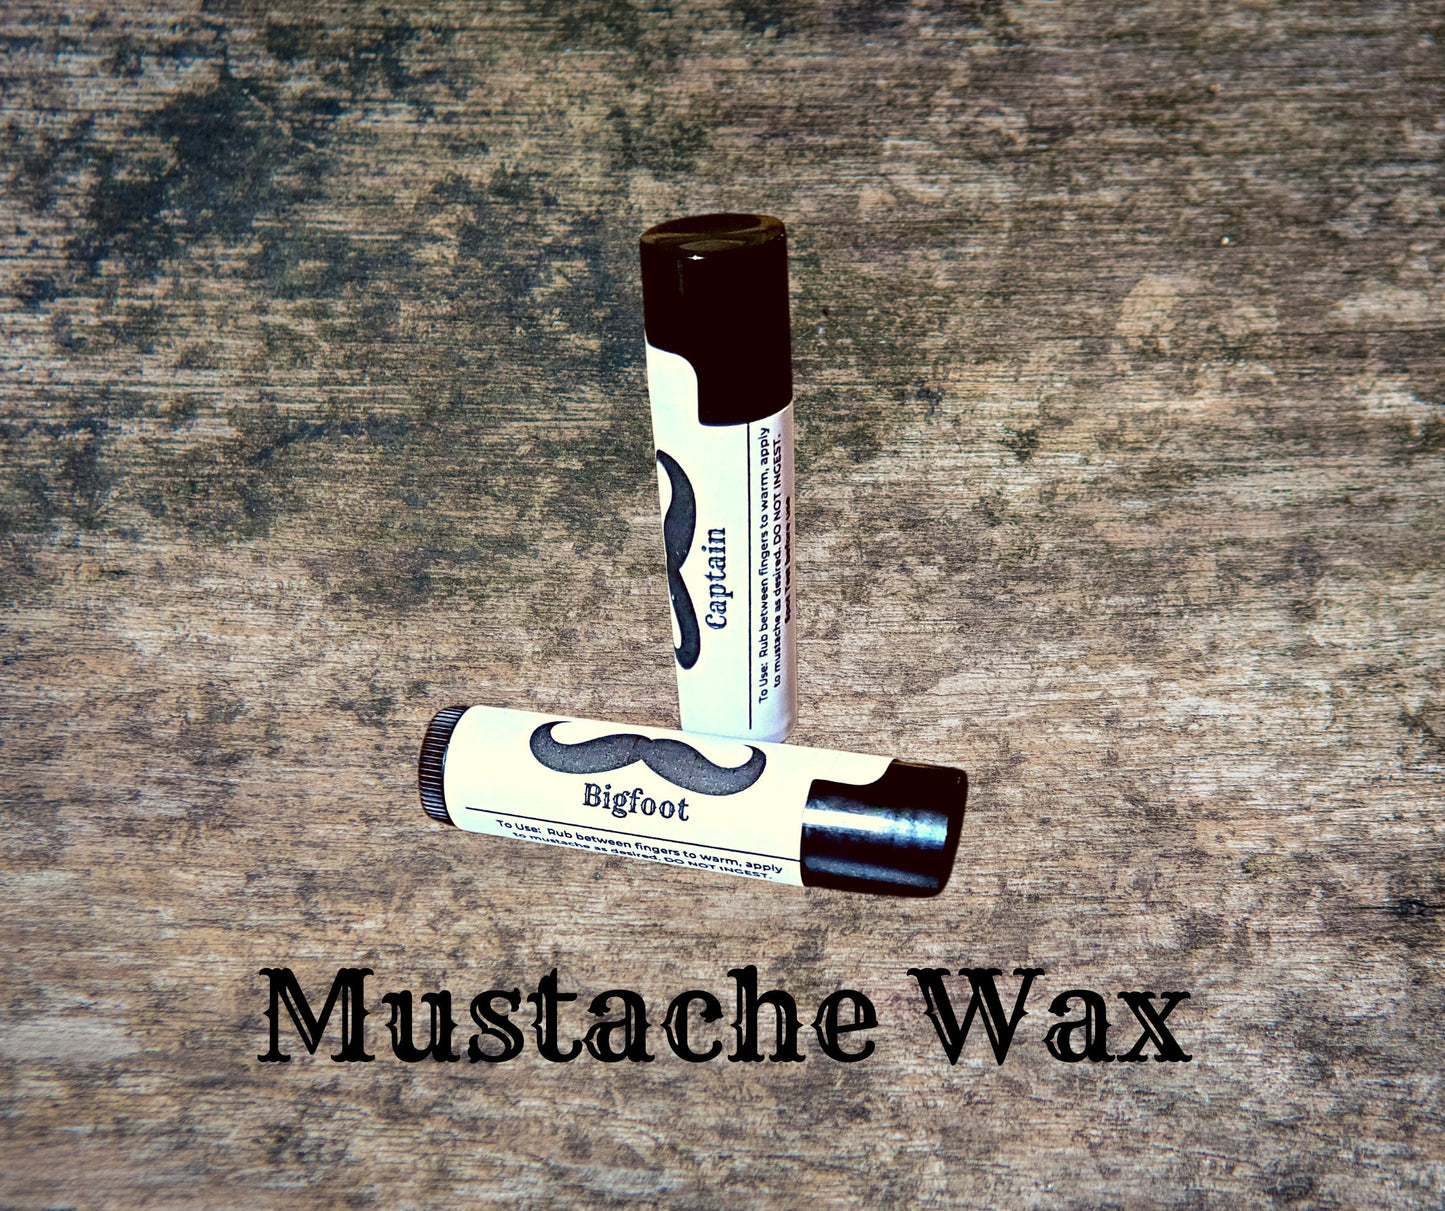 SALE! Steampunk Scented Mustache Wax (Handmade) Lord and Lady Towers